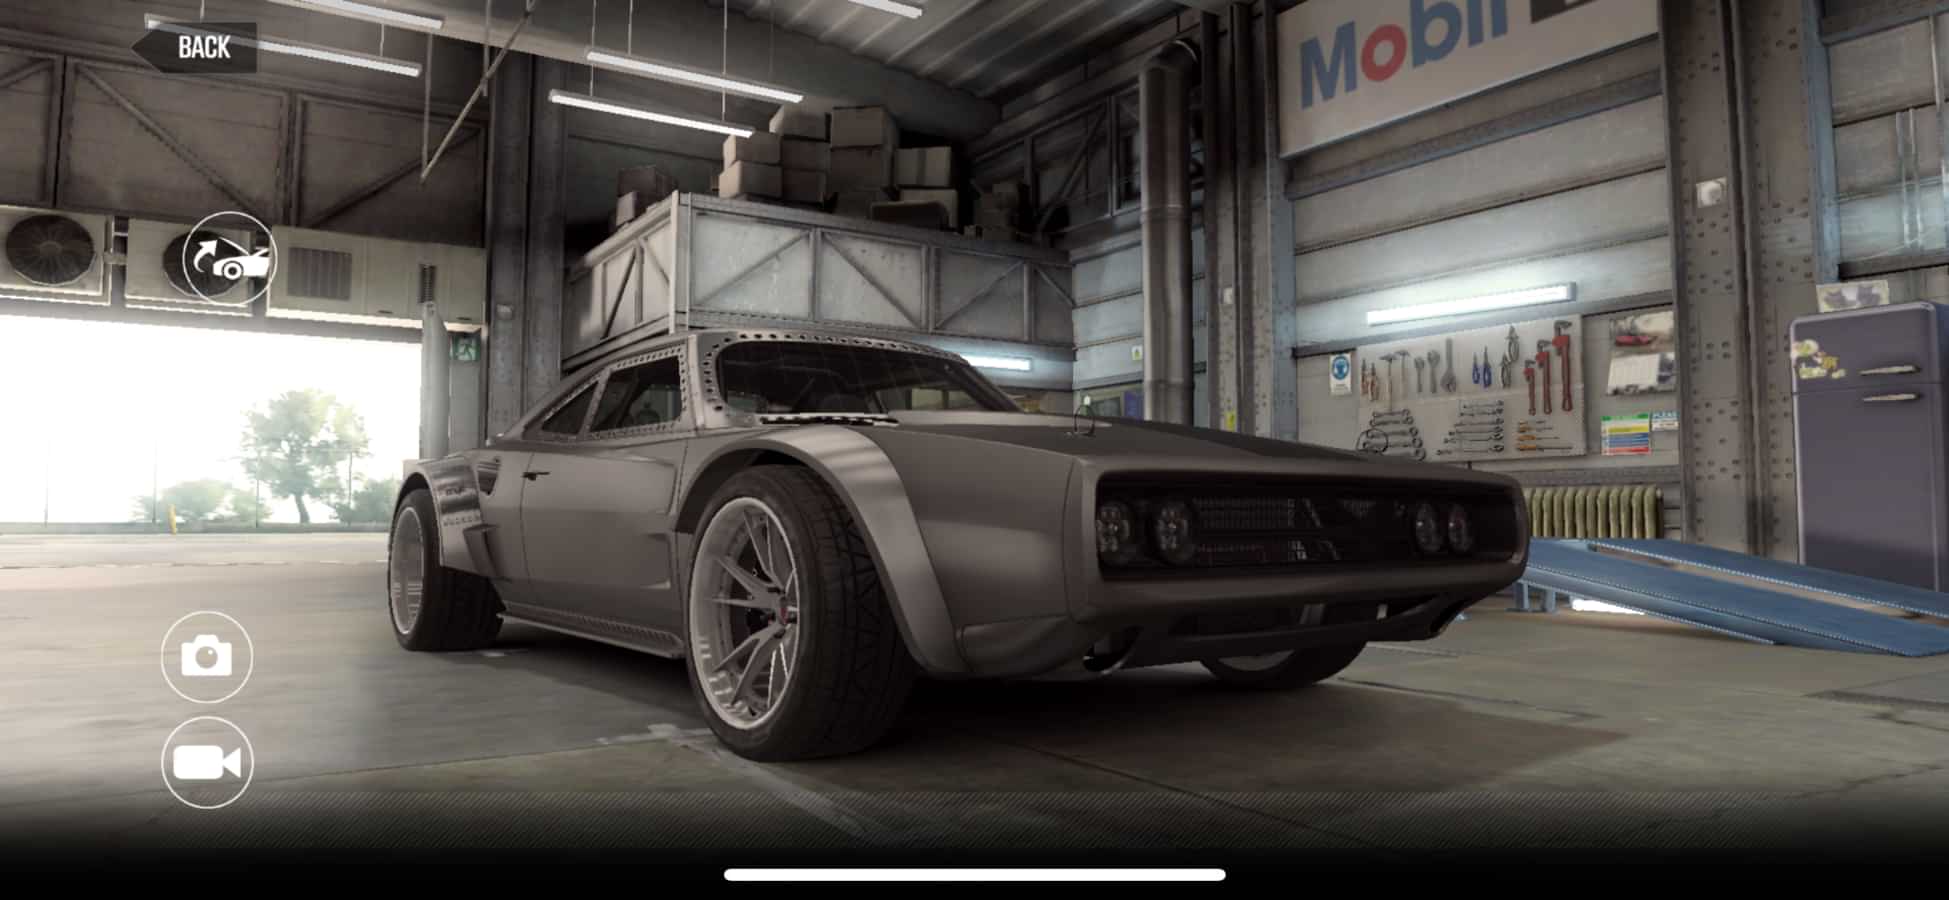 Dodge Ice Charger CSR2, best tune and shift pattern